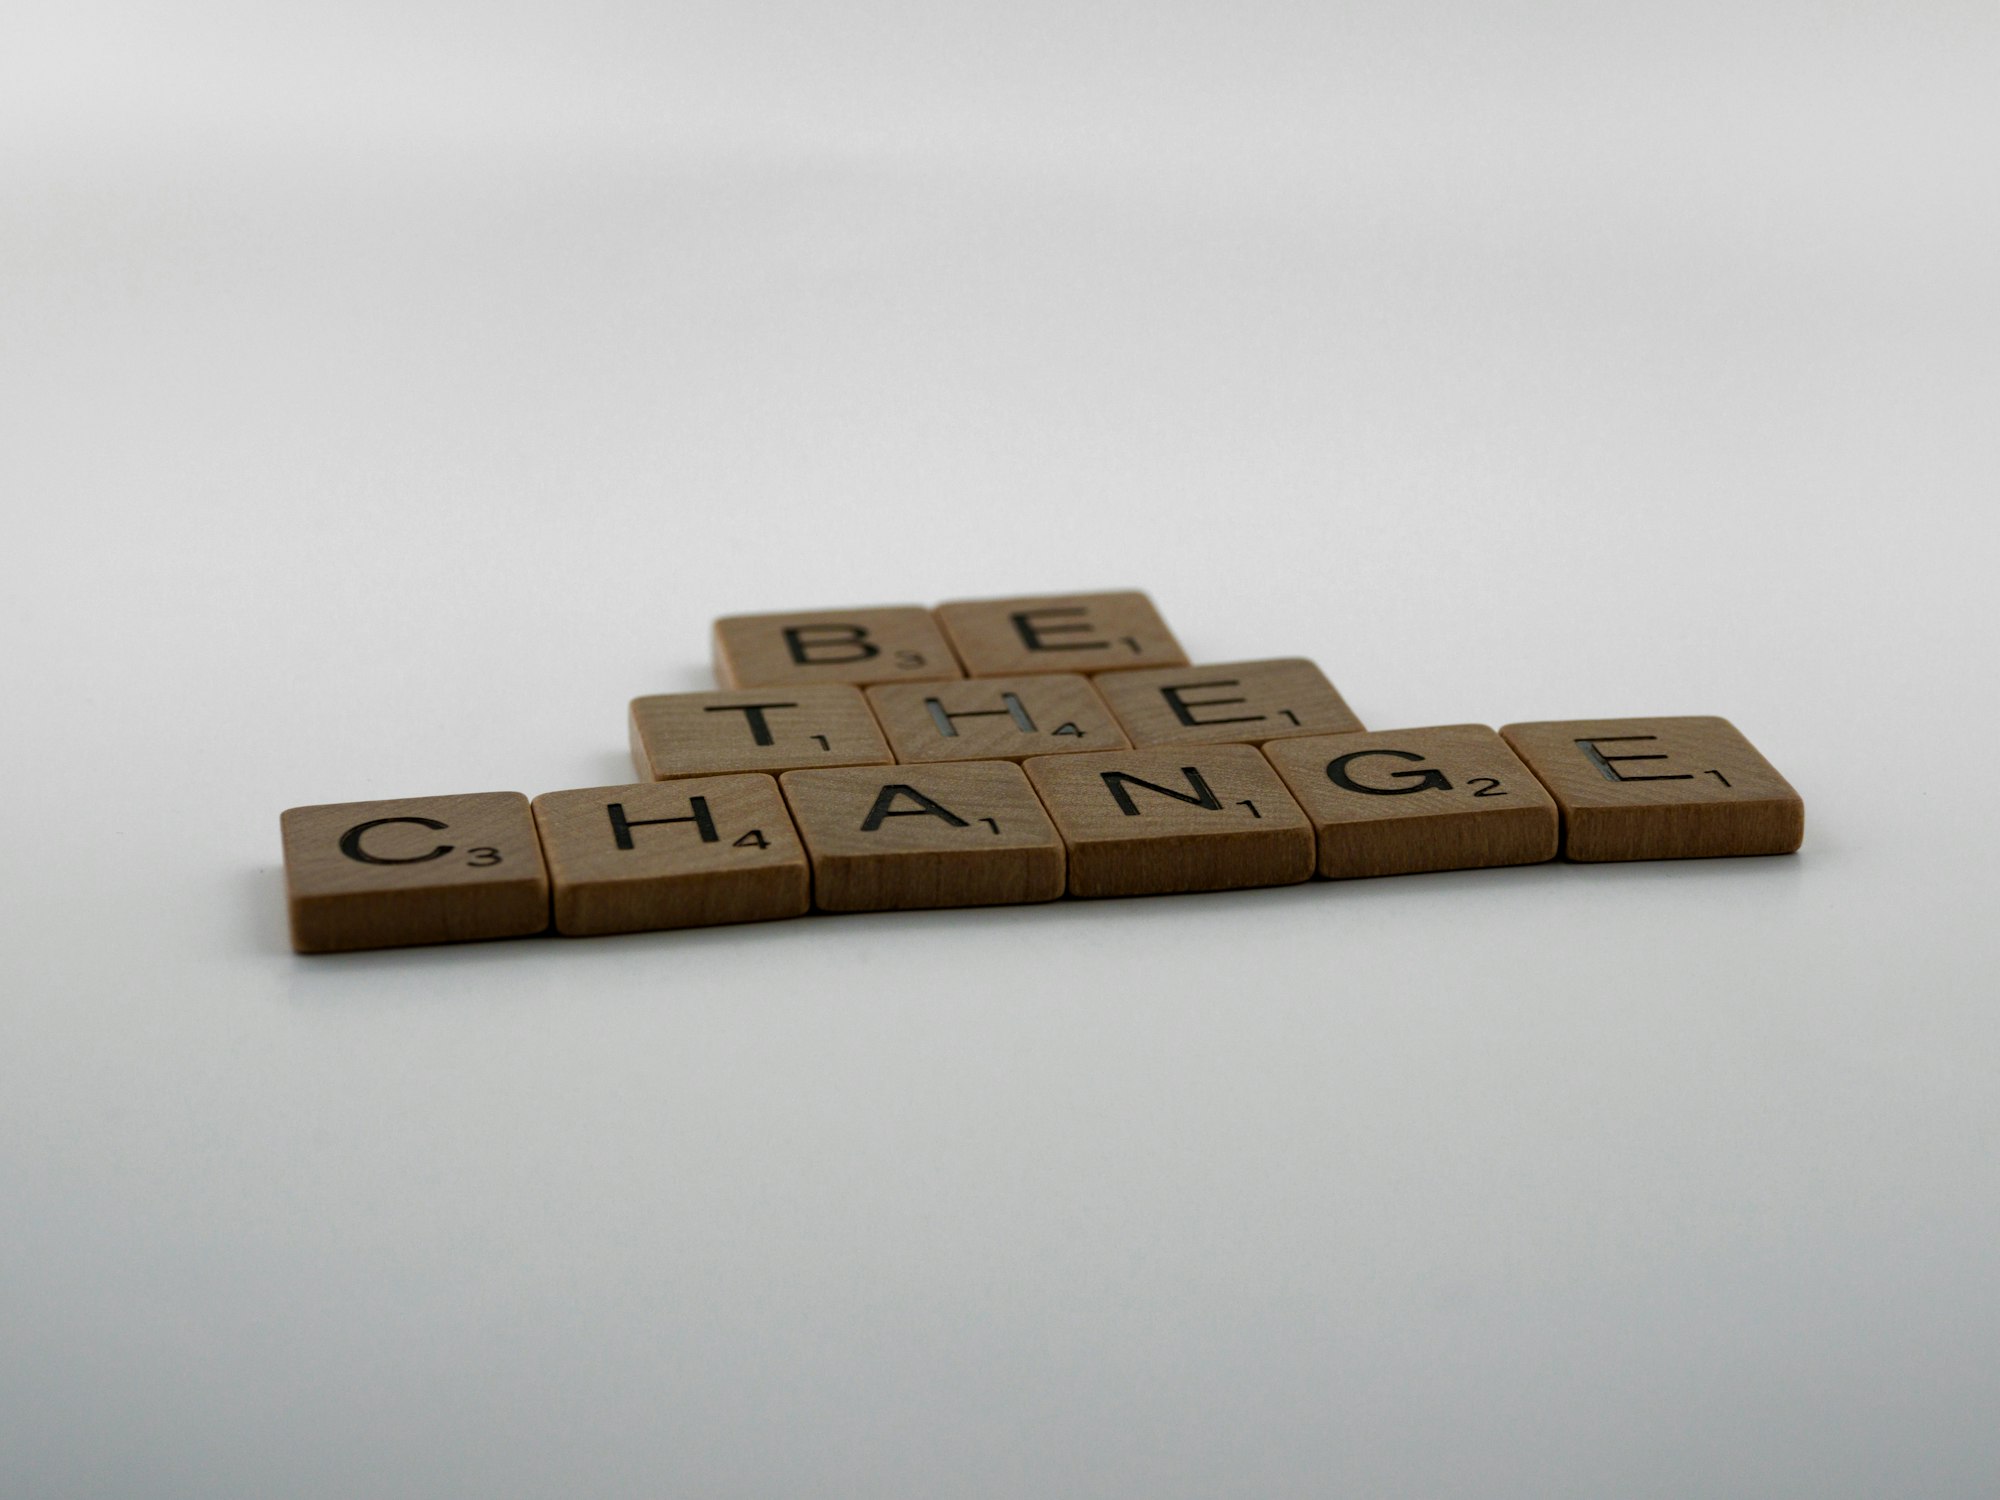 scrabble, scrabble pieces, lettering, letters, wood, scrabble tiles, white background, quote, words, type, typography, design, layout, be the change, proactive, activism, make a difference, don't just sit there, make a change, global warming, black lives matter, personal responsibility, responsibility, with great power comes great responsibility, 
